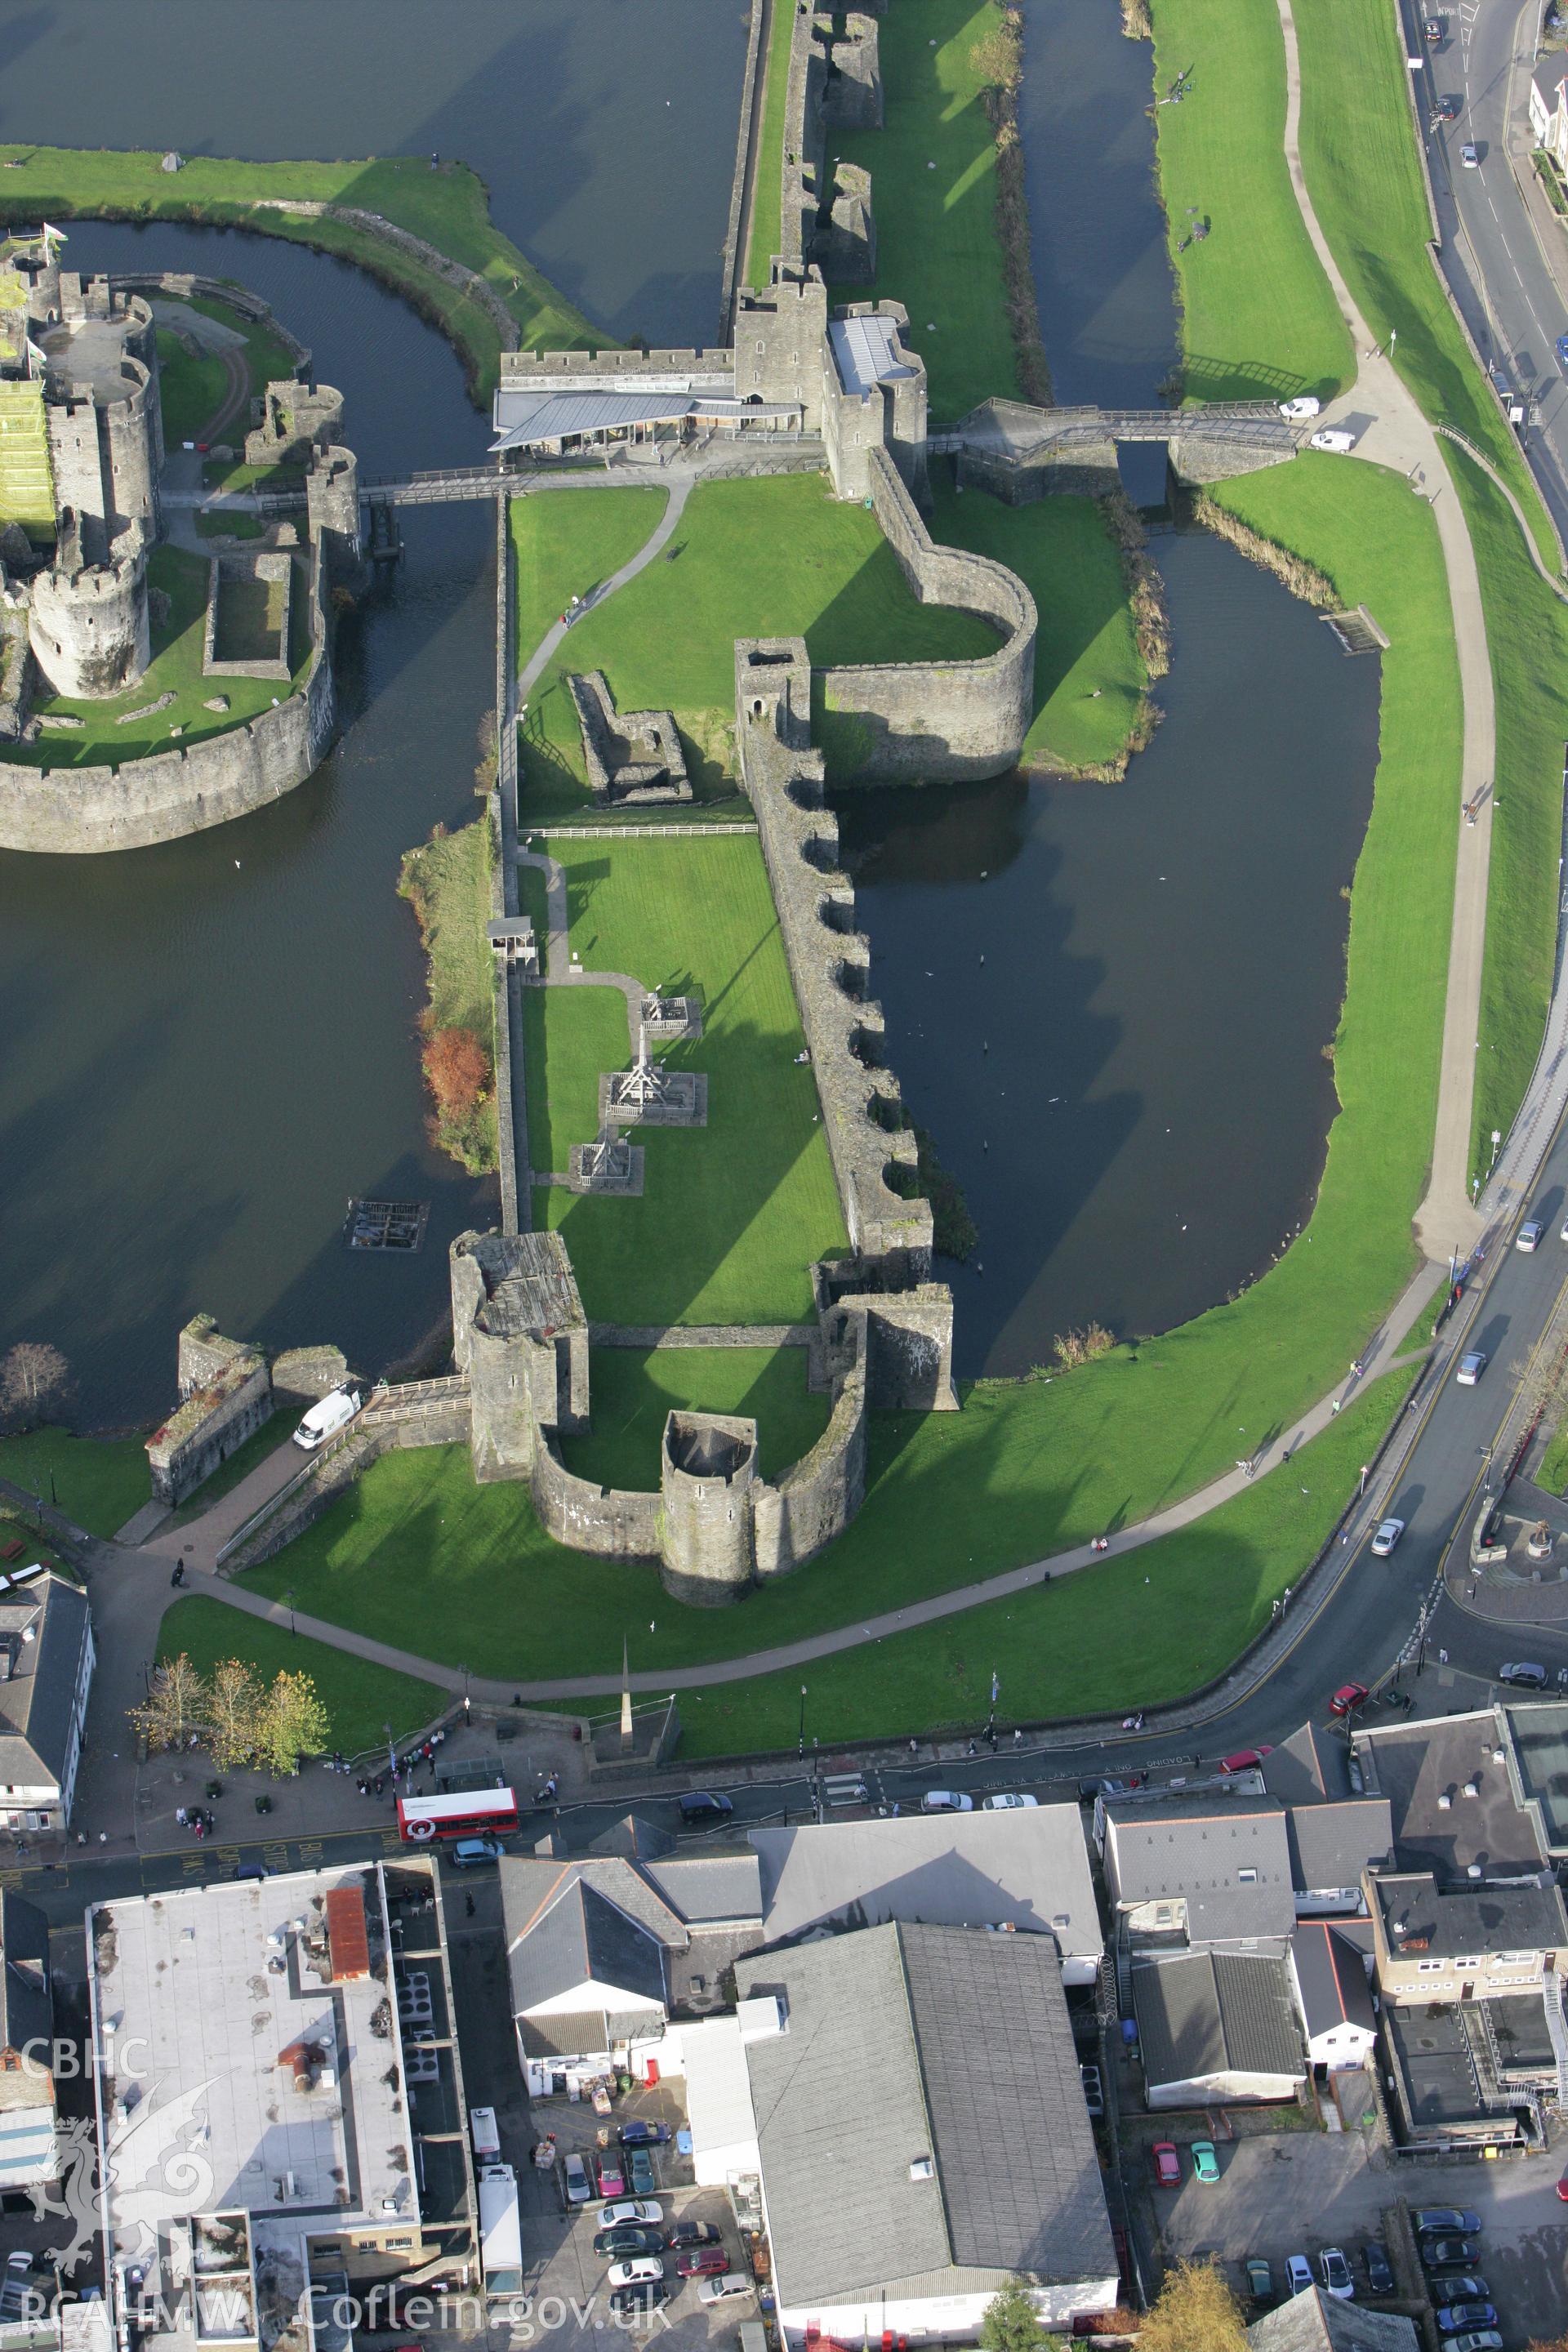 RCAHMW colour oblique photograph of Caerphilly Castle. Taken by Toby Driver on 12/11/2008.